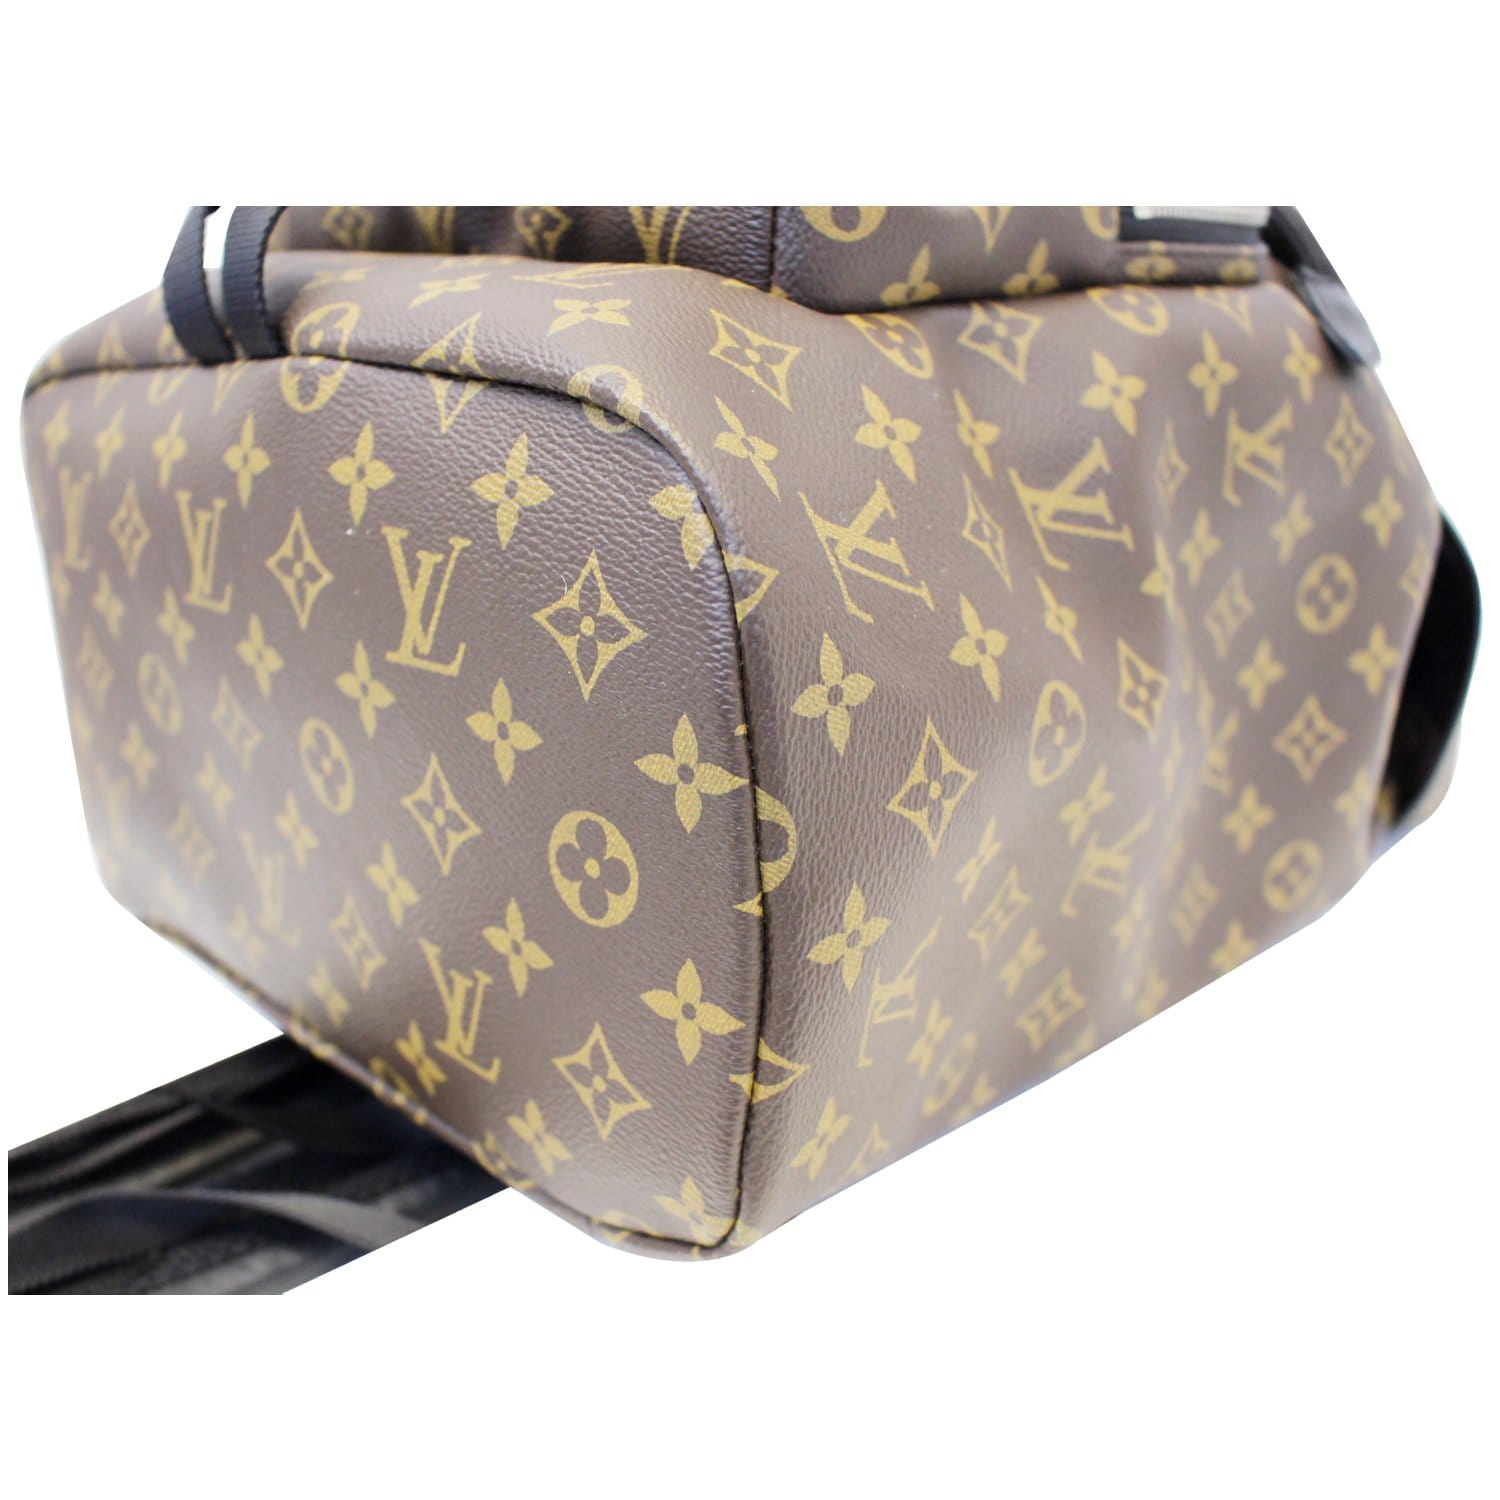 Louis Vuitton LV Men Zack Backpack in Coated Canvas - LULUX